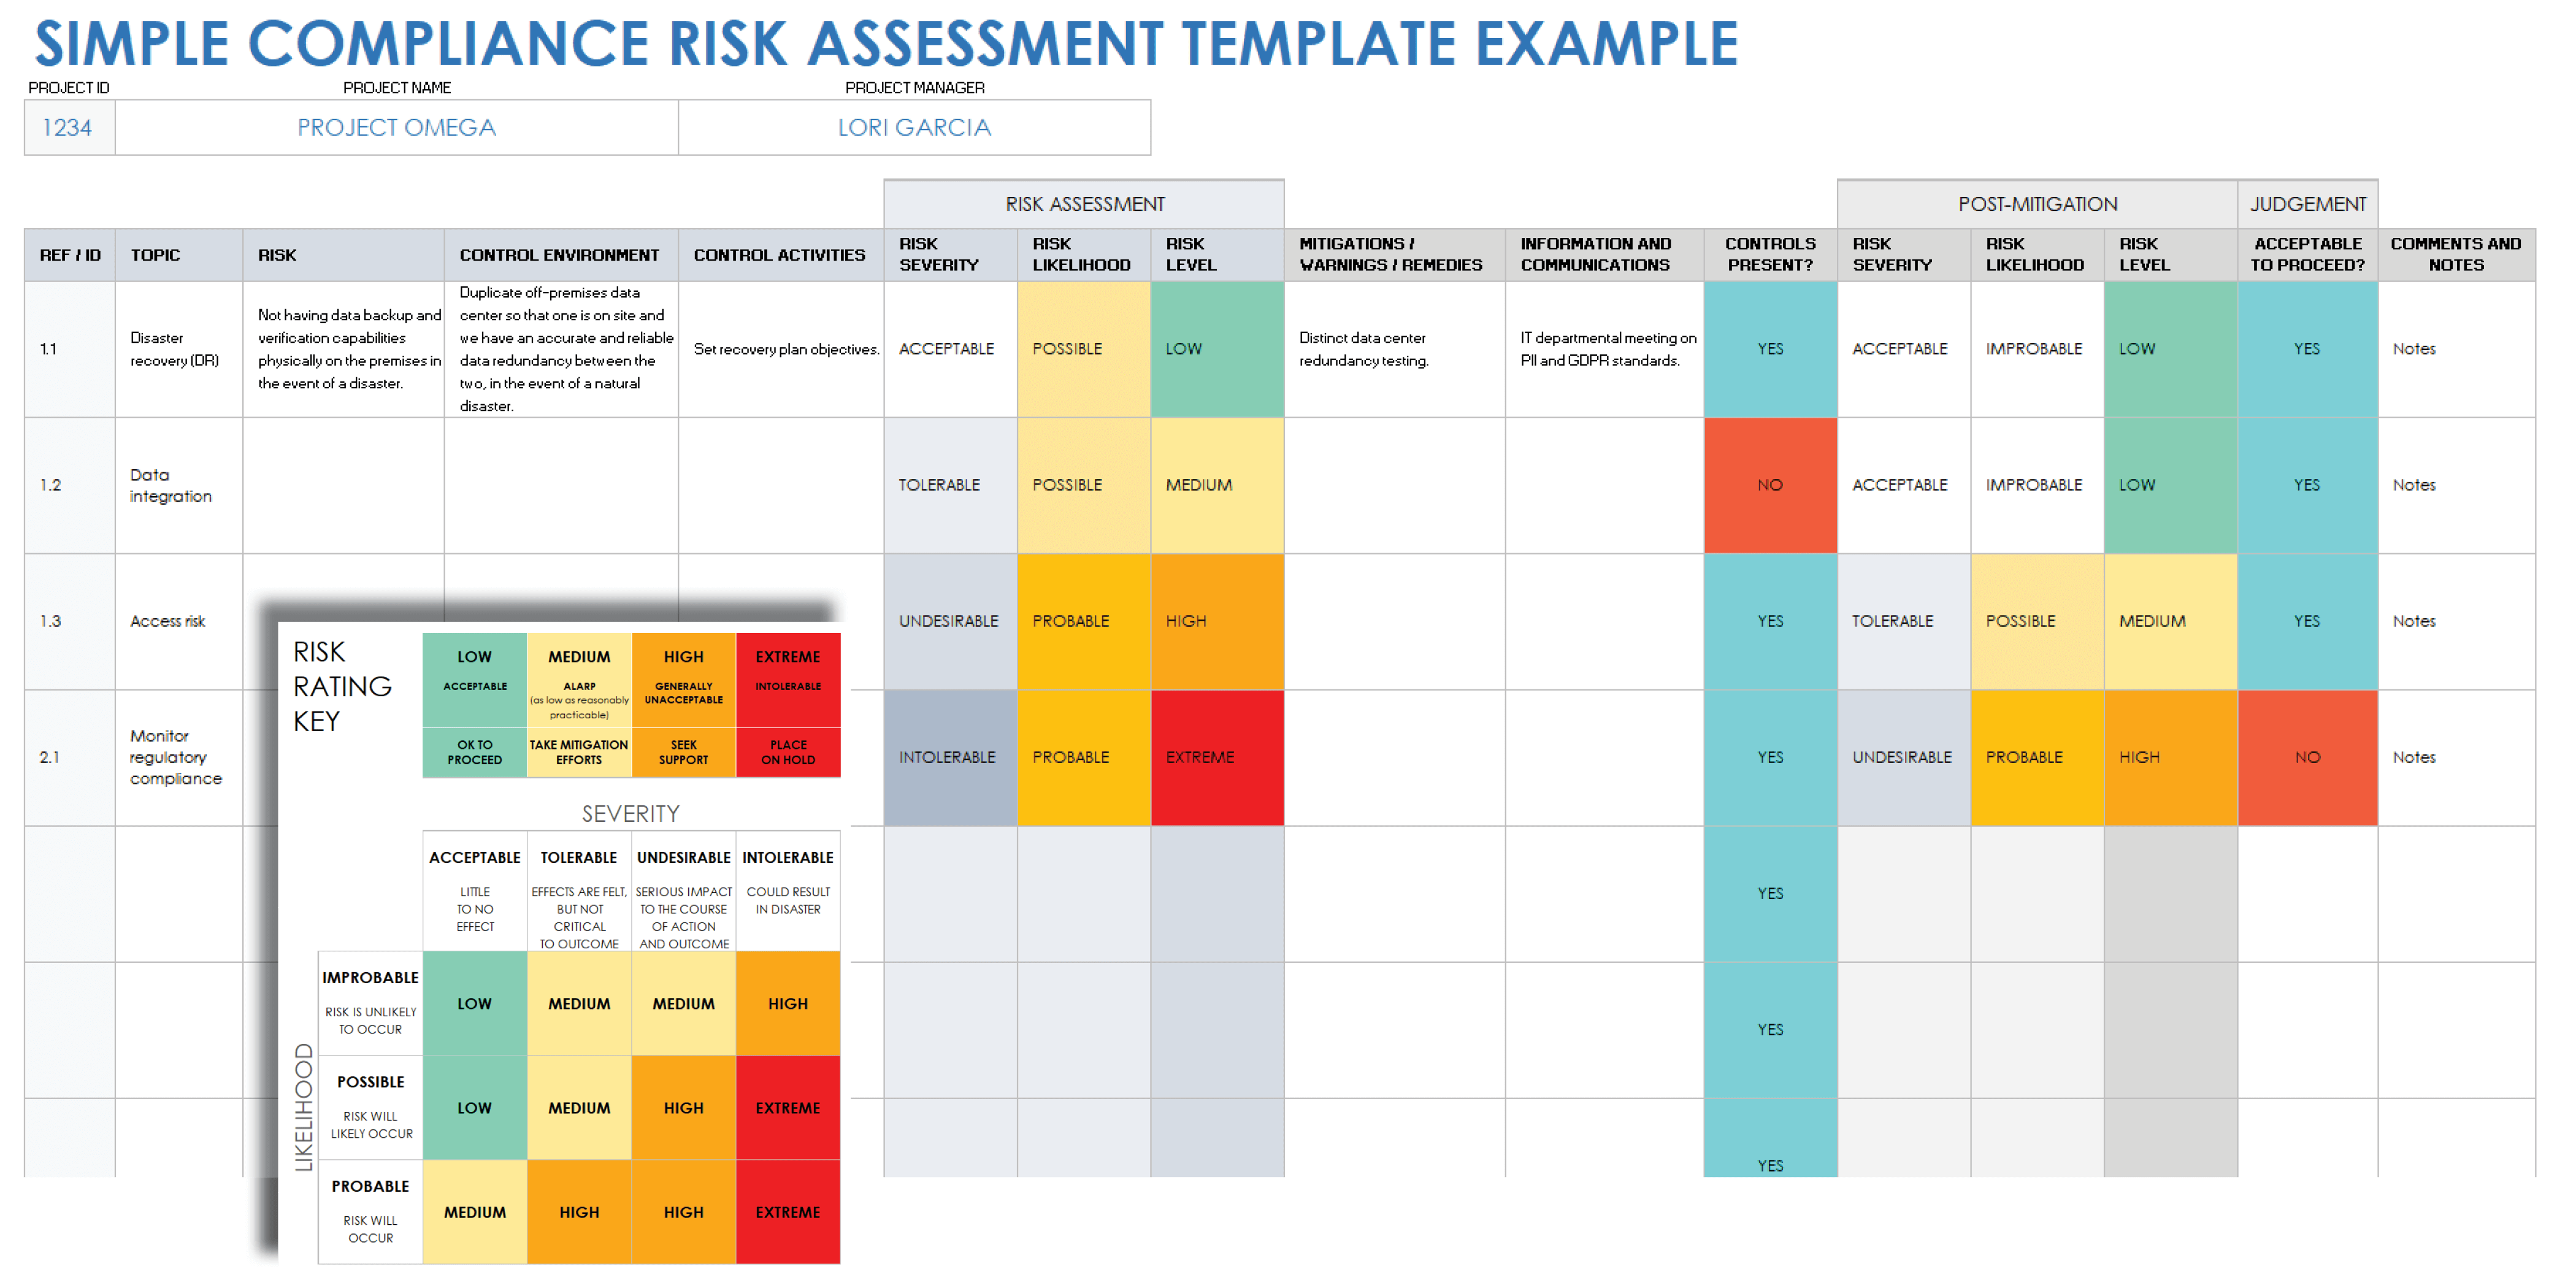 Simple Compliance Risk Assessment Example Template